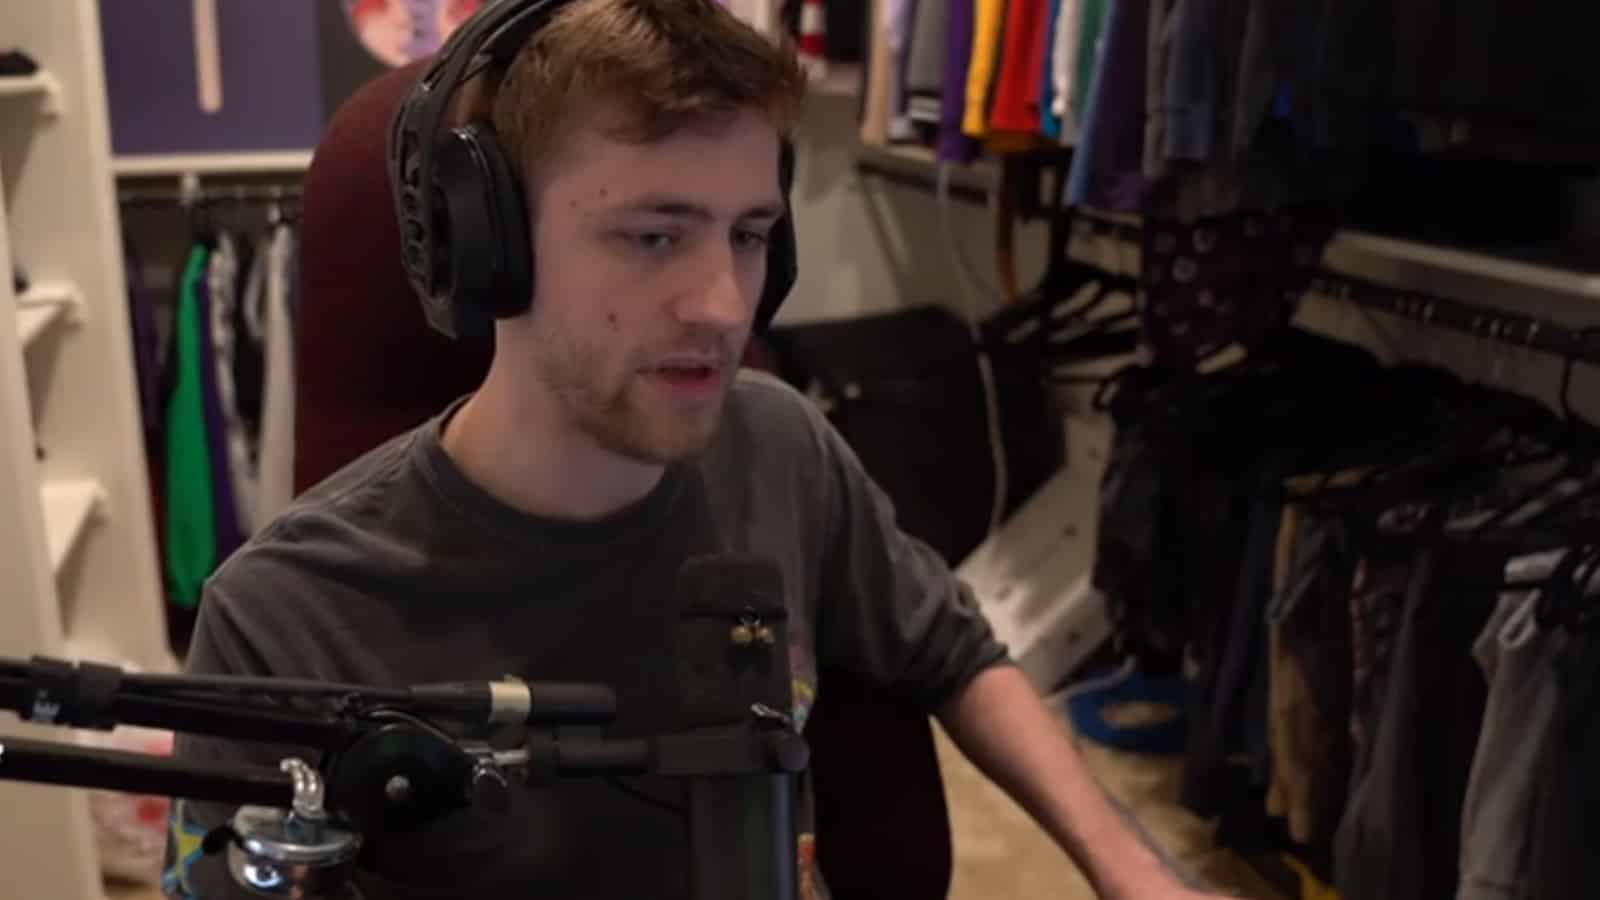 sodapopping-unbanned-on-twitch-following-two-weeks-suspension-admits-he-deserved-the-ban